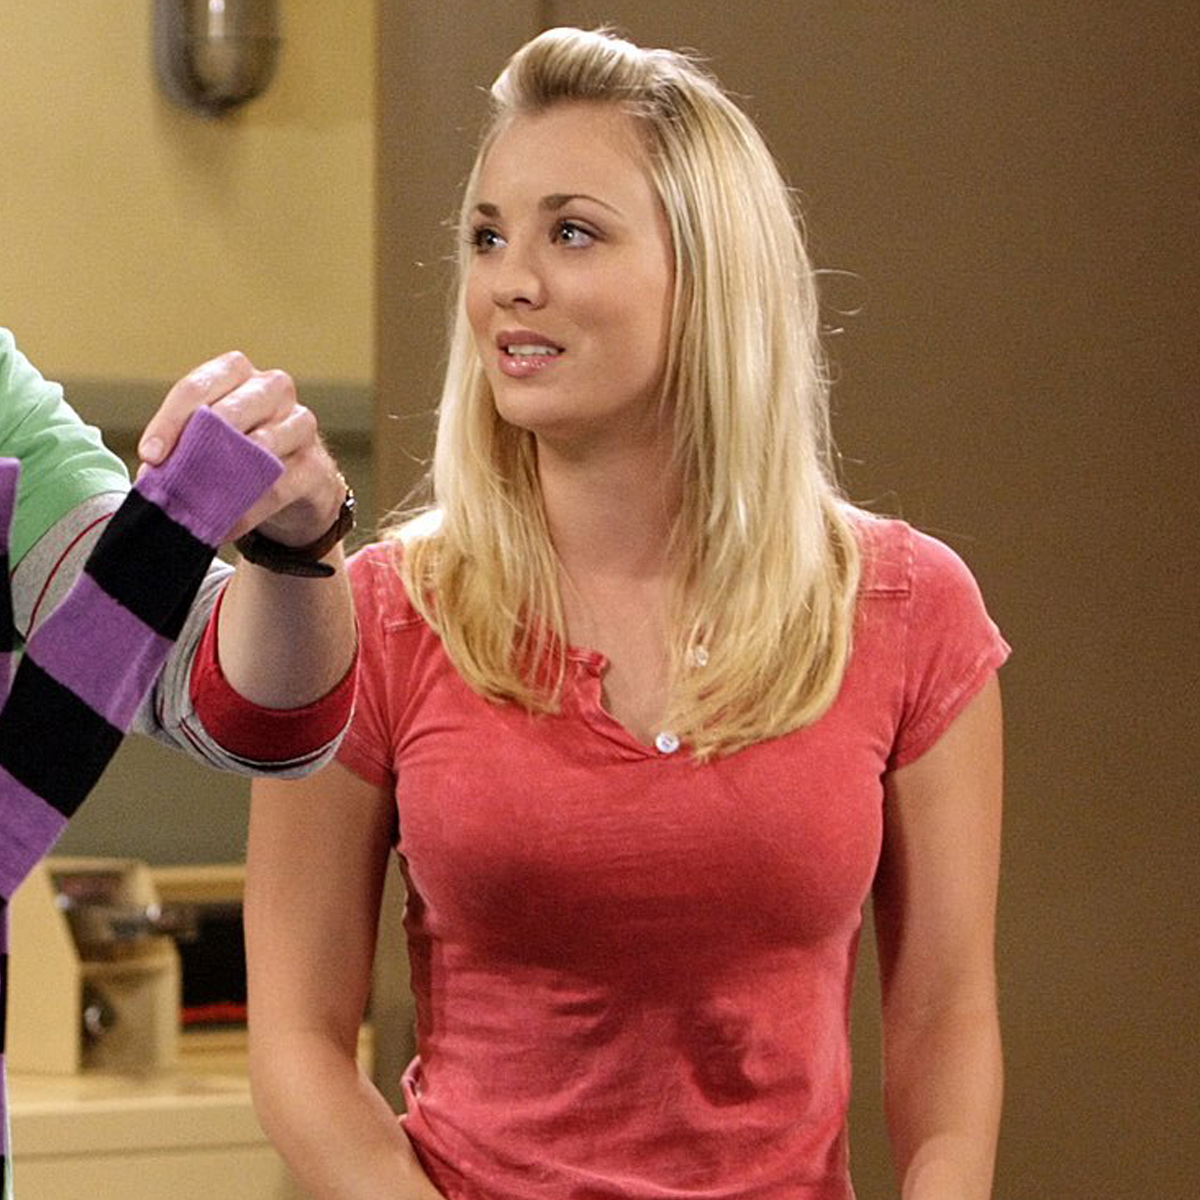 Kaley Cuoco Blowjob Sex - The Big Bang Theory Nearly Cast This Star Over Kaley Cuoco - E! Online